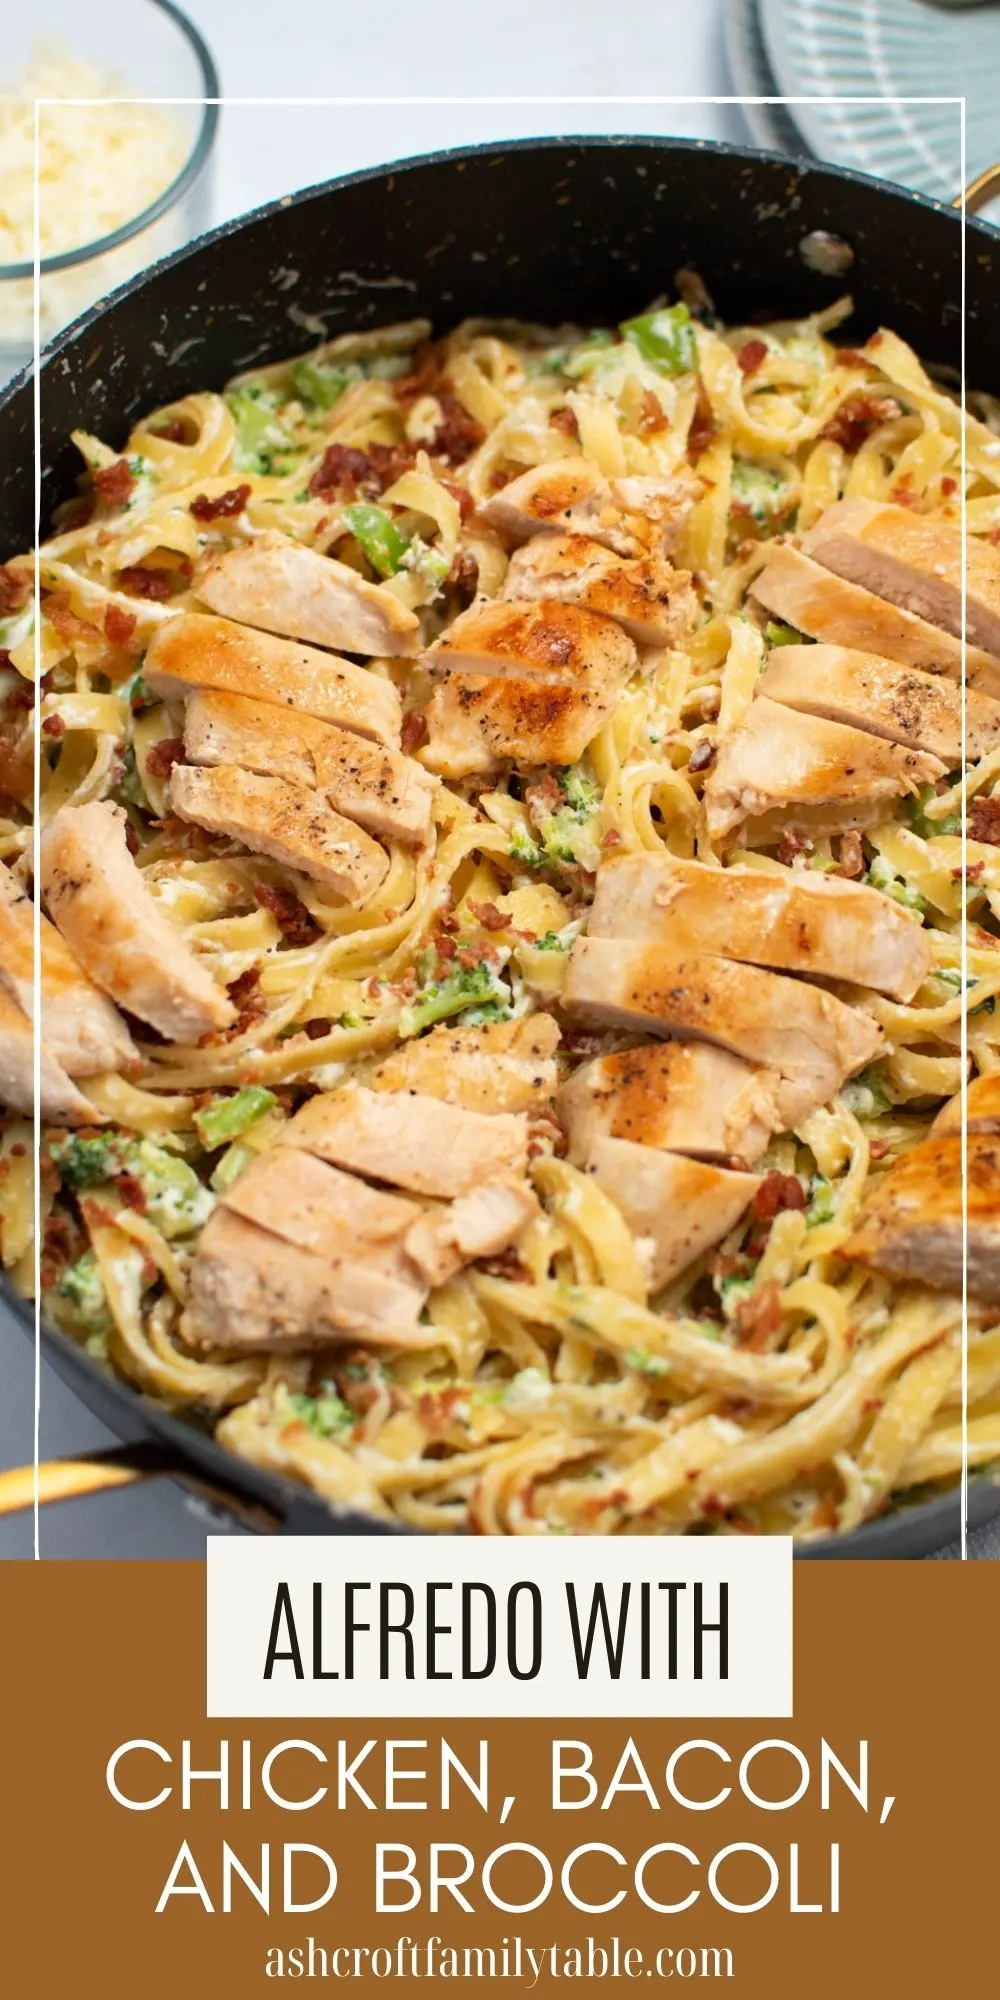 Pinterest graphic with text and photo of skillet full of chicken bacon broccoli alfredo.